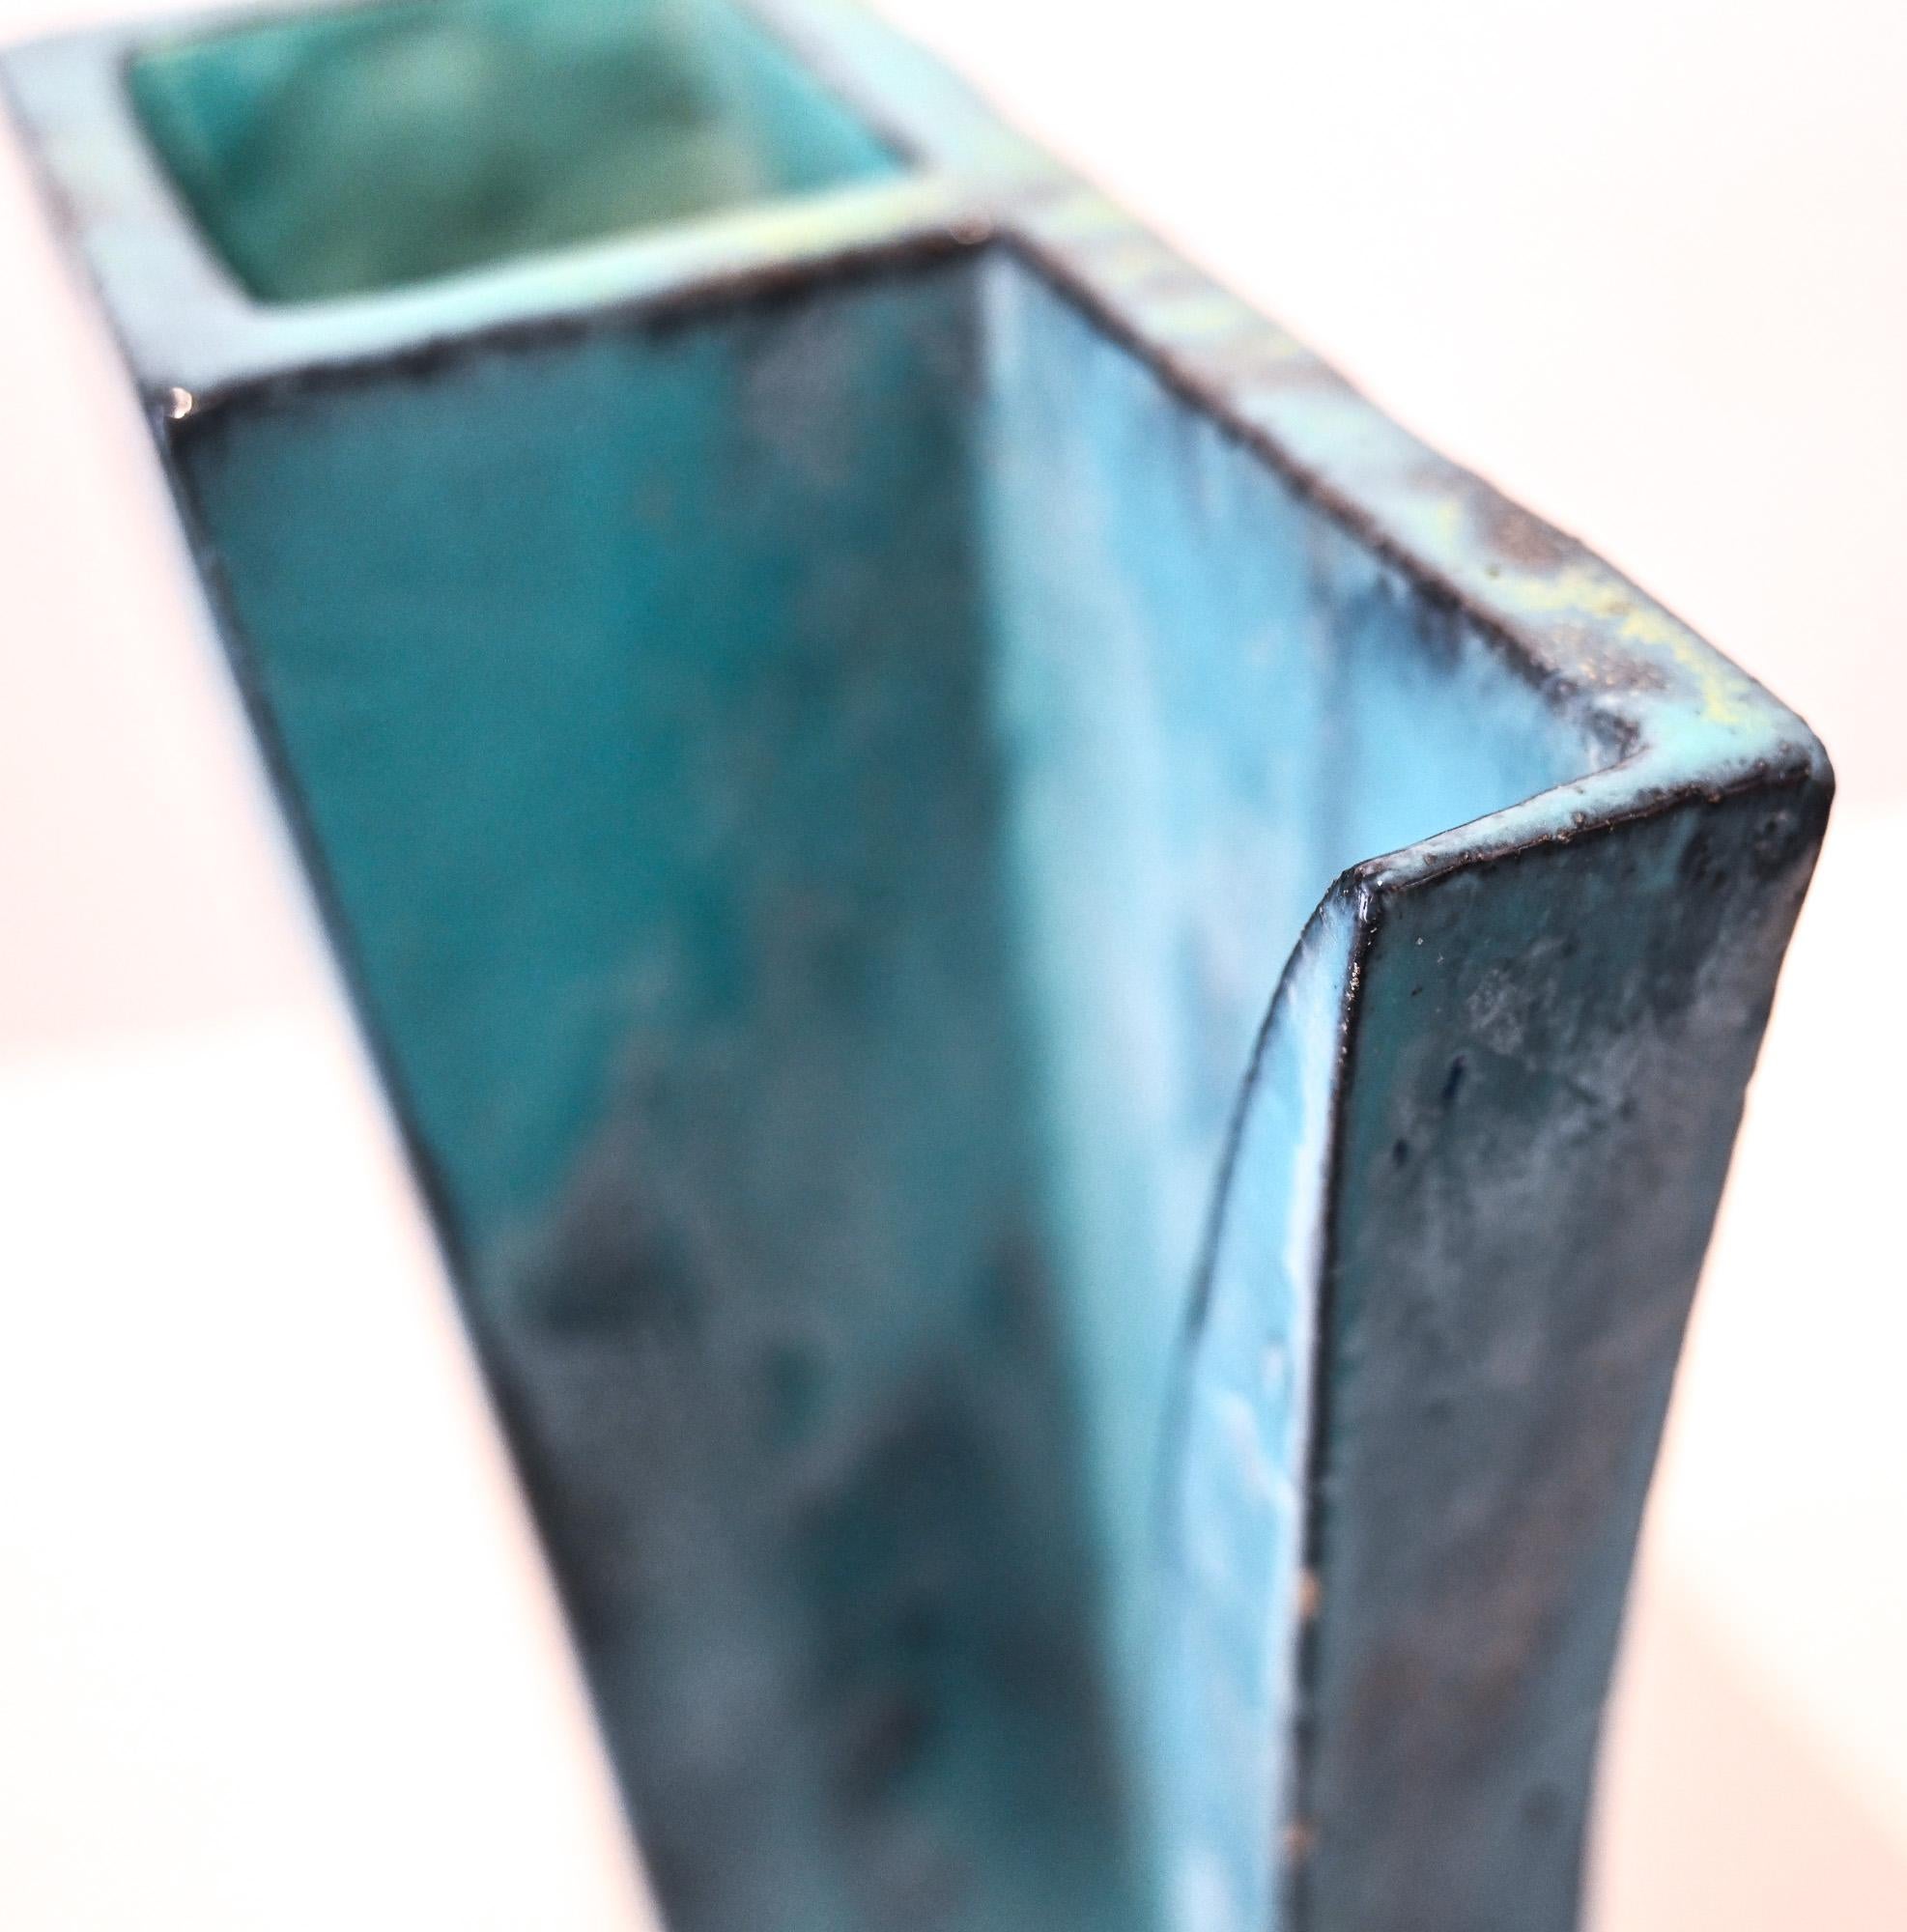 turquoise slab vase by Marcello Fantoni Italy by Marcello Fantoni (1915-2011) – Florence, Italy Signed to the base Fantoni. and dated 1960
Provenance: sourced directly from the Fantoni family

